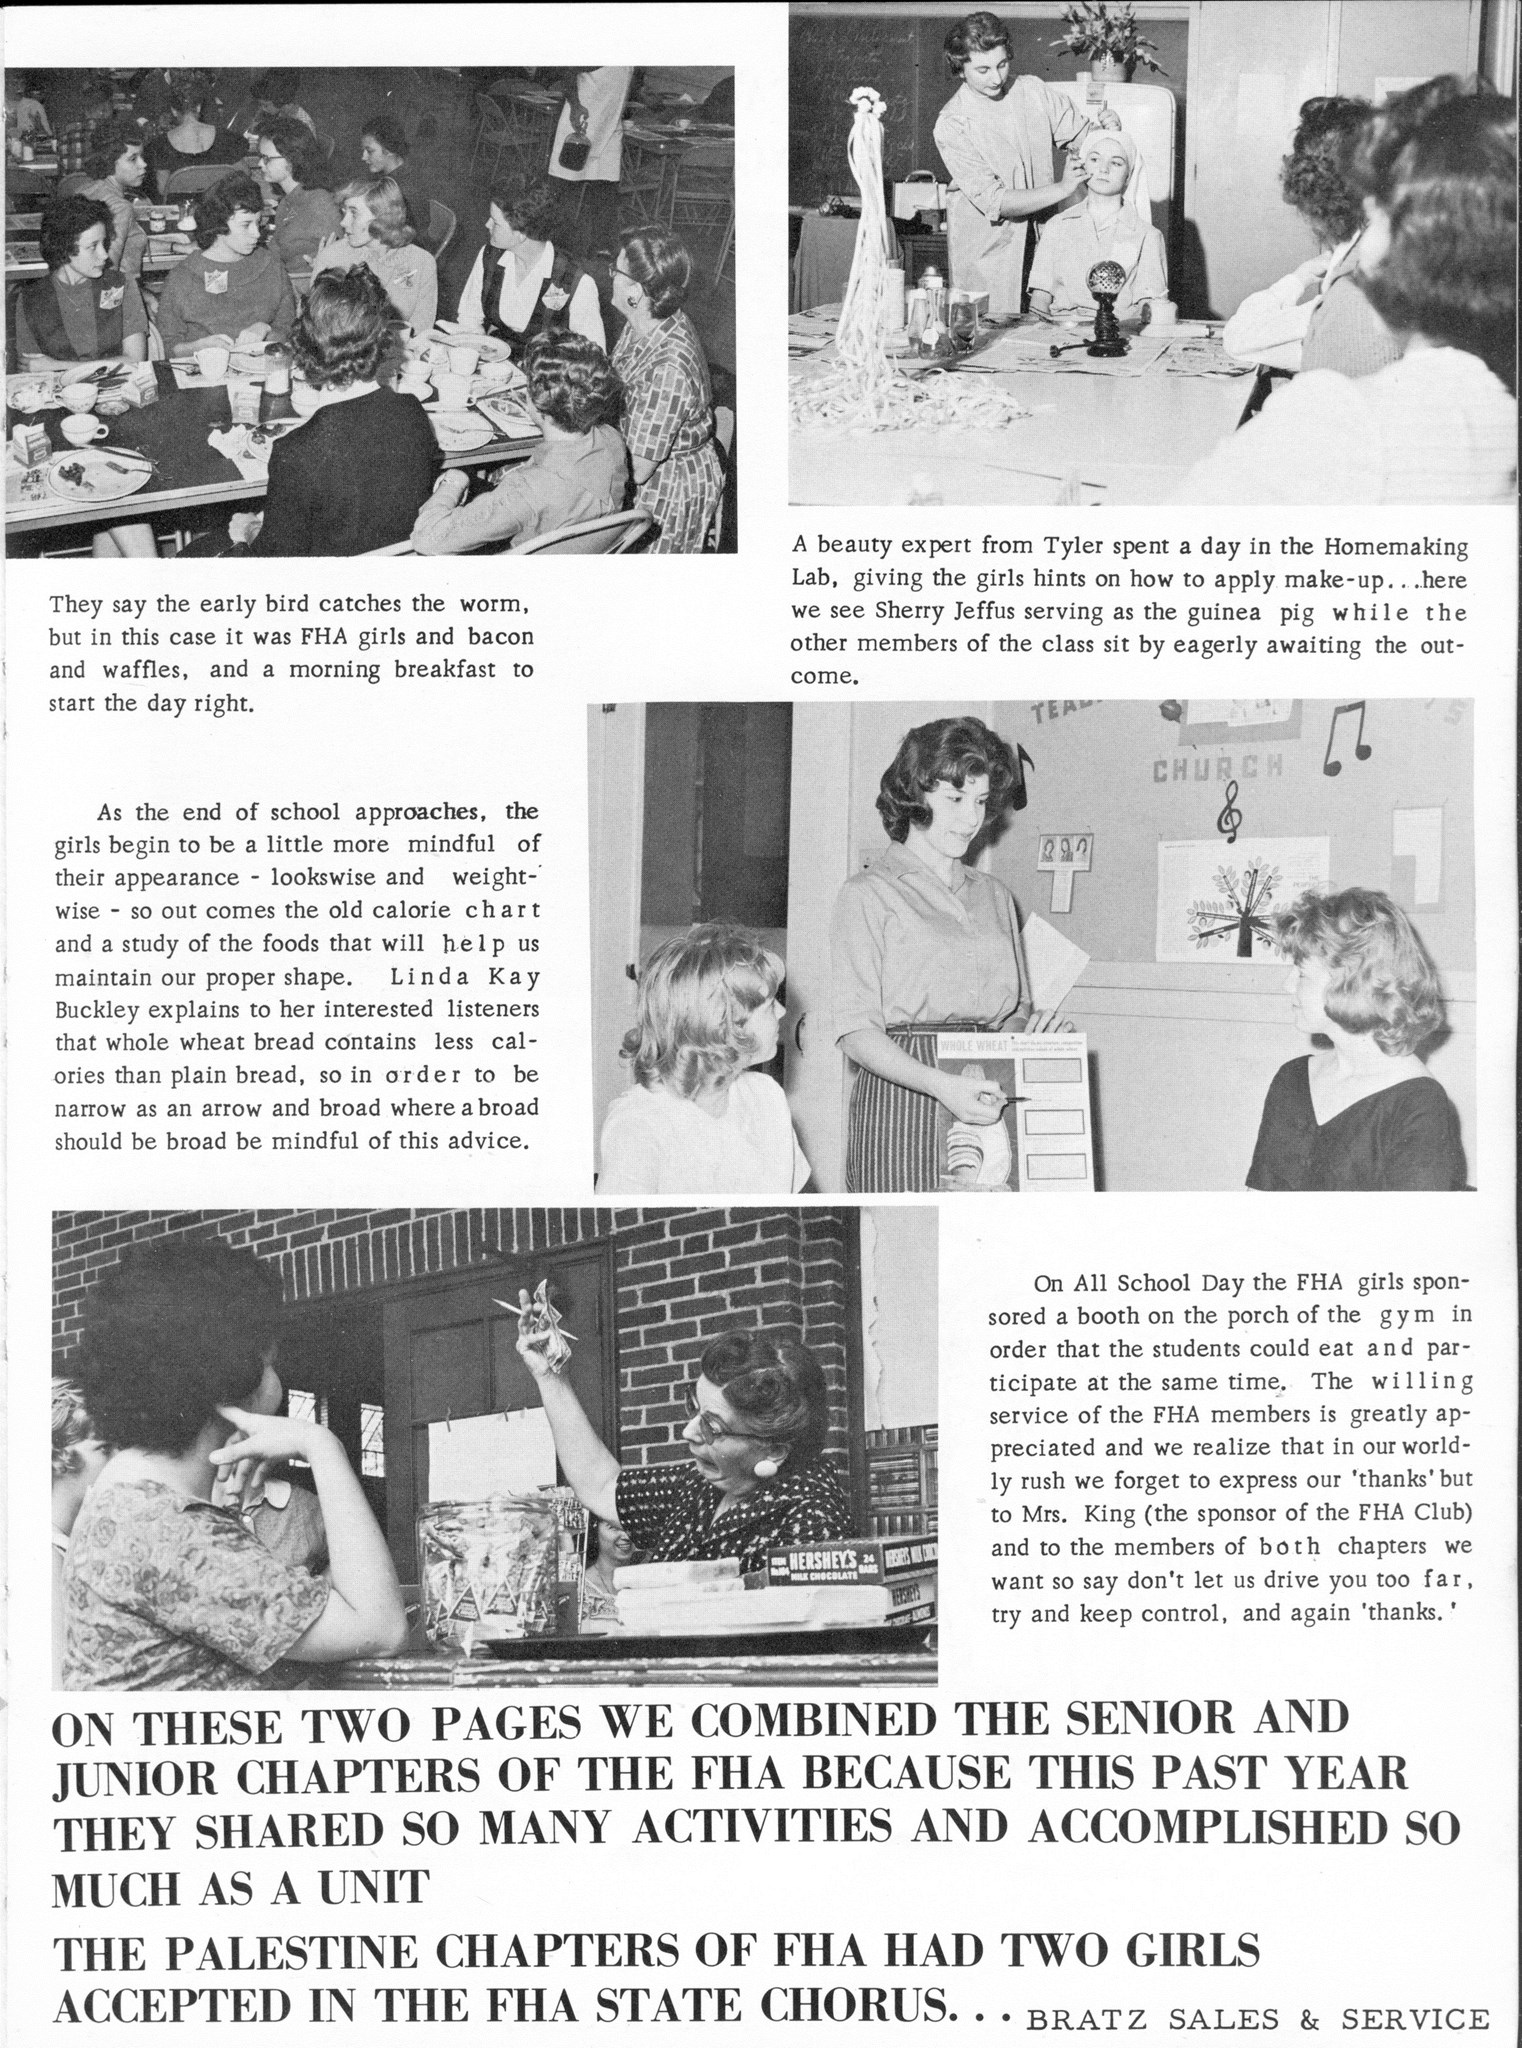 ../../../Images/Large/1961/Arclight-1961-pg0147.jpg